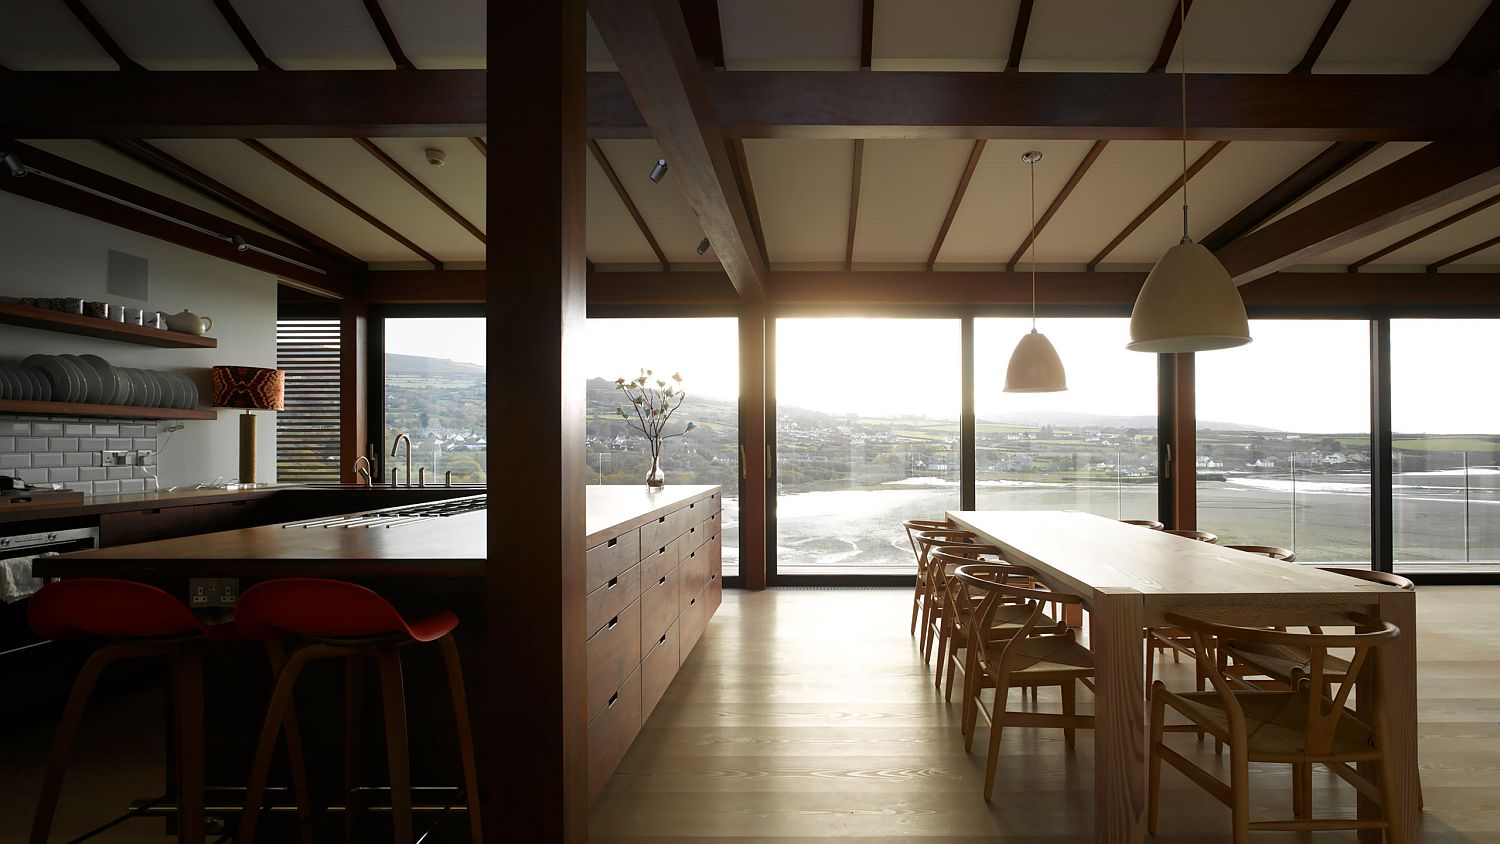 Wooden beams shape the ceiling in the kitchen and dining area